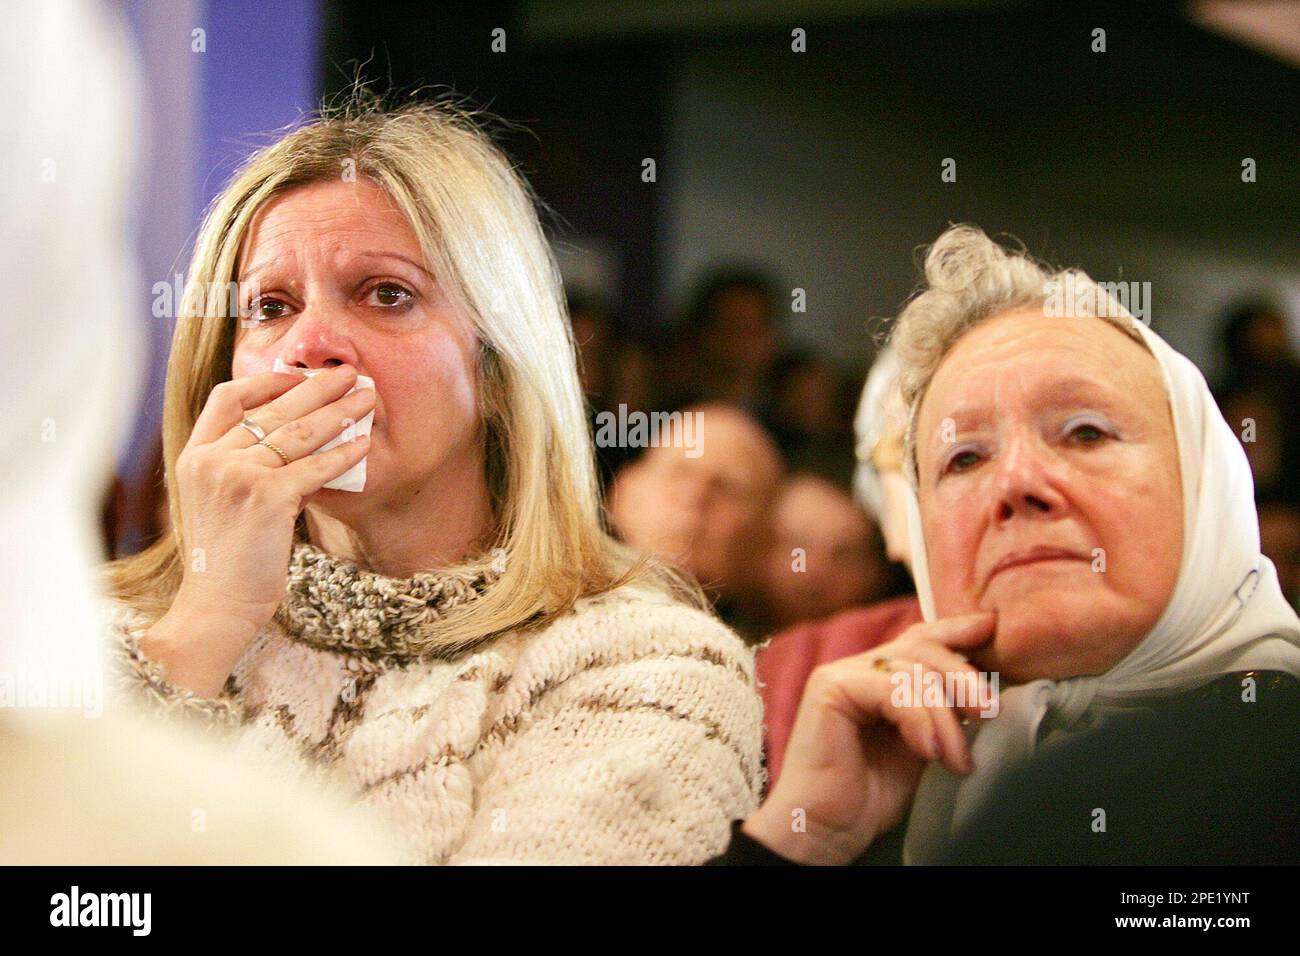 An unidentified woman cries beside Nora Cortinas, right, of the human rights group Mothers of Plaza de Mayo as they attend a news conference offered by an anthropologist in Buenos Aires, Friday, July 8, 2005, where it was announced that the remains of Esther Ballestrino de Careaga, Maria Ponce de Bianco and Azucena Villaflor, the three missing women who founded Mothers of Plaza de Mayo human rights group, were found and identified in a cemetery in the south of Buenos Aires. The three women were abducted in December 1977 while trying to find the fate of their missing children. (AP Photo/Natacha Stock Photo